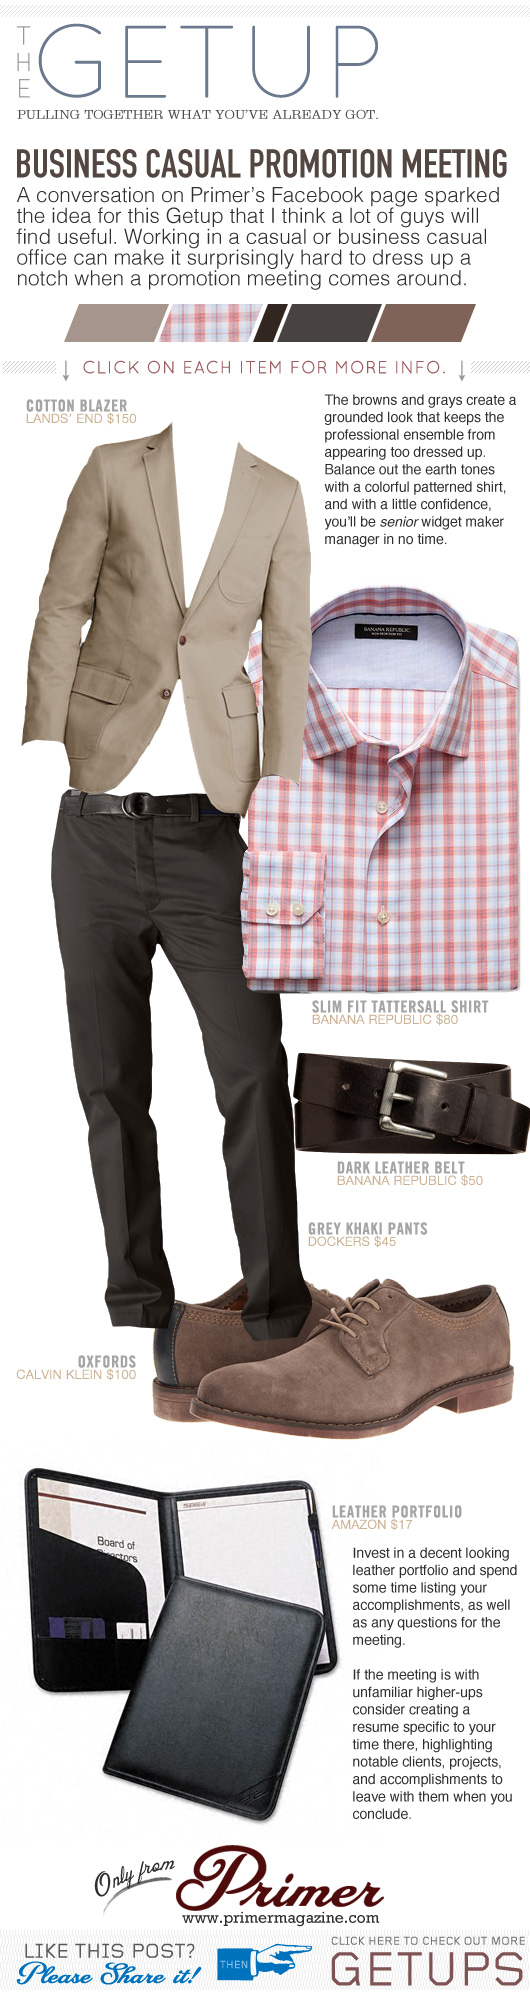 Getup Business Casual Promotion Meeting - Tan blazer, red check shirt, brown pants